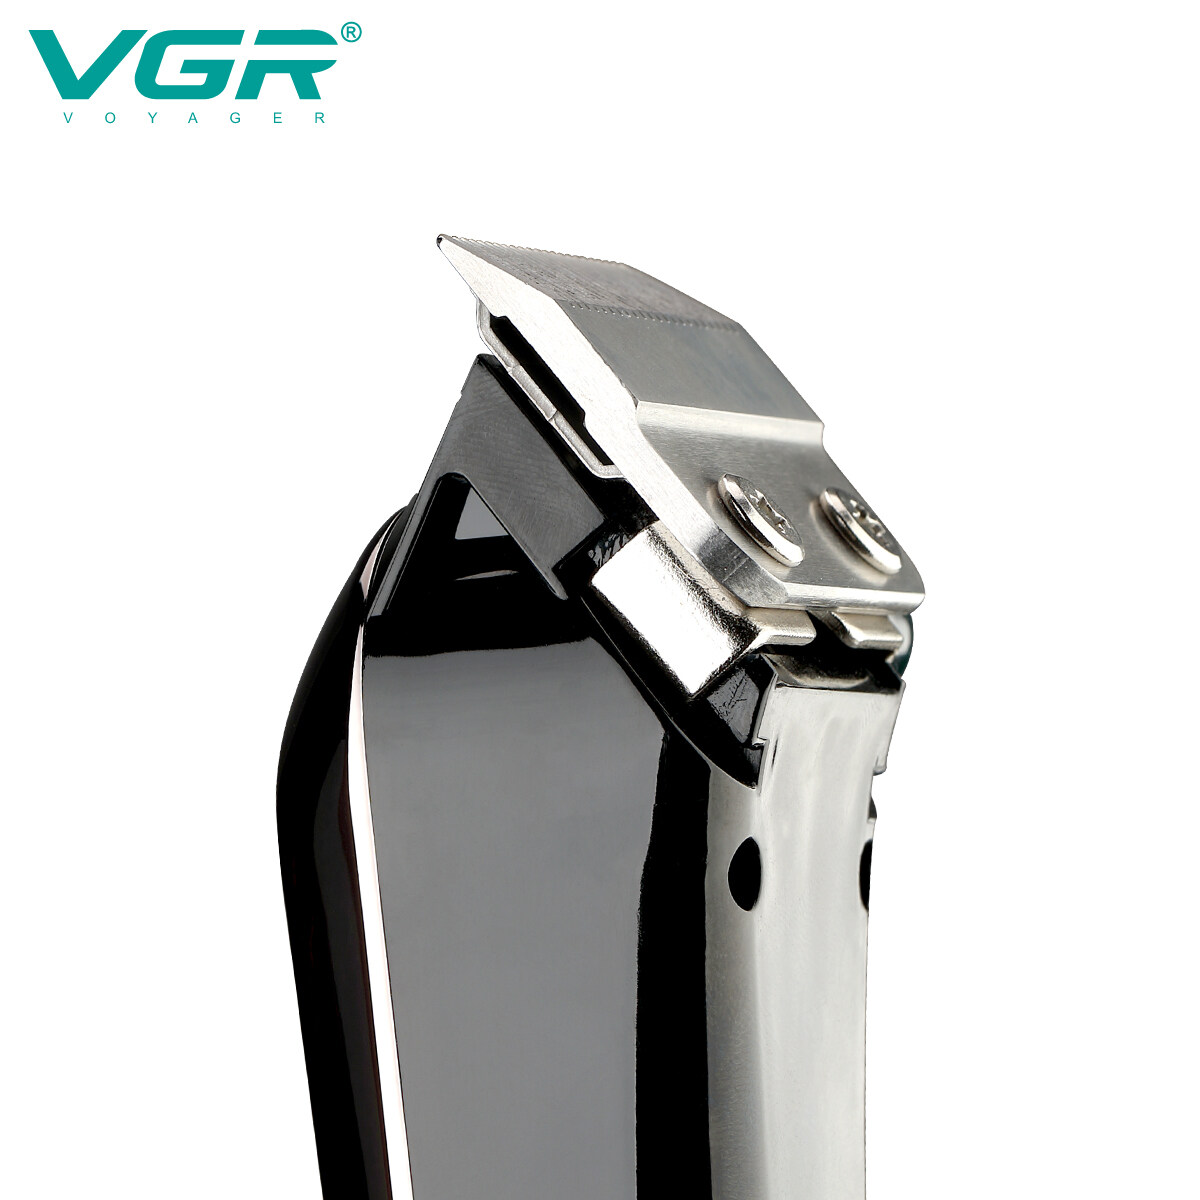 Usb Charger Hair Clippers Factory, Usb Charger Hair Clippers Manufacturer, Wholesale Usb Charger Hair Clippers